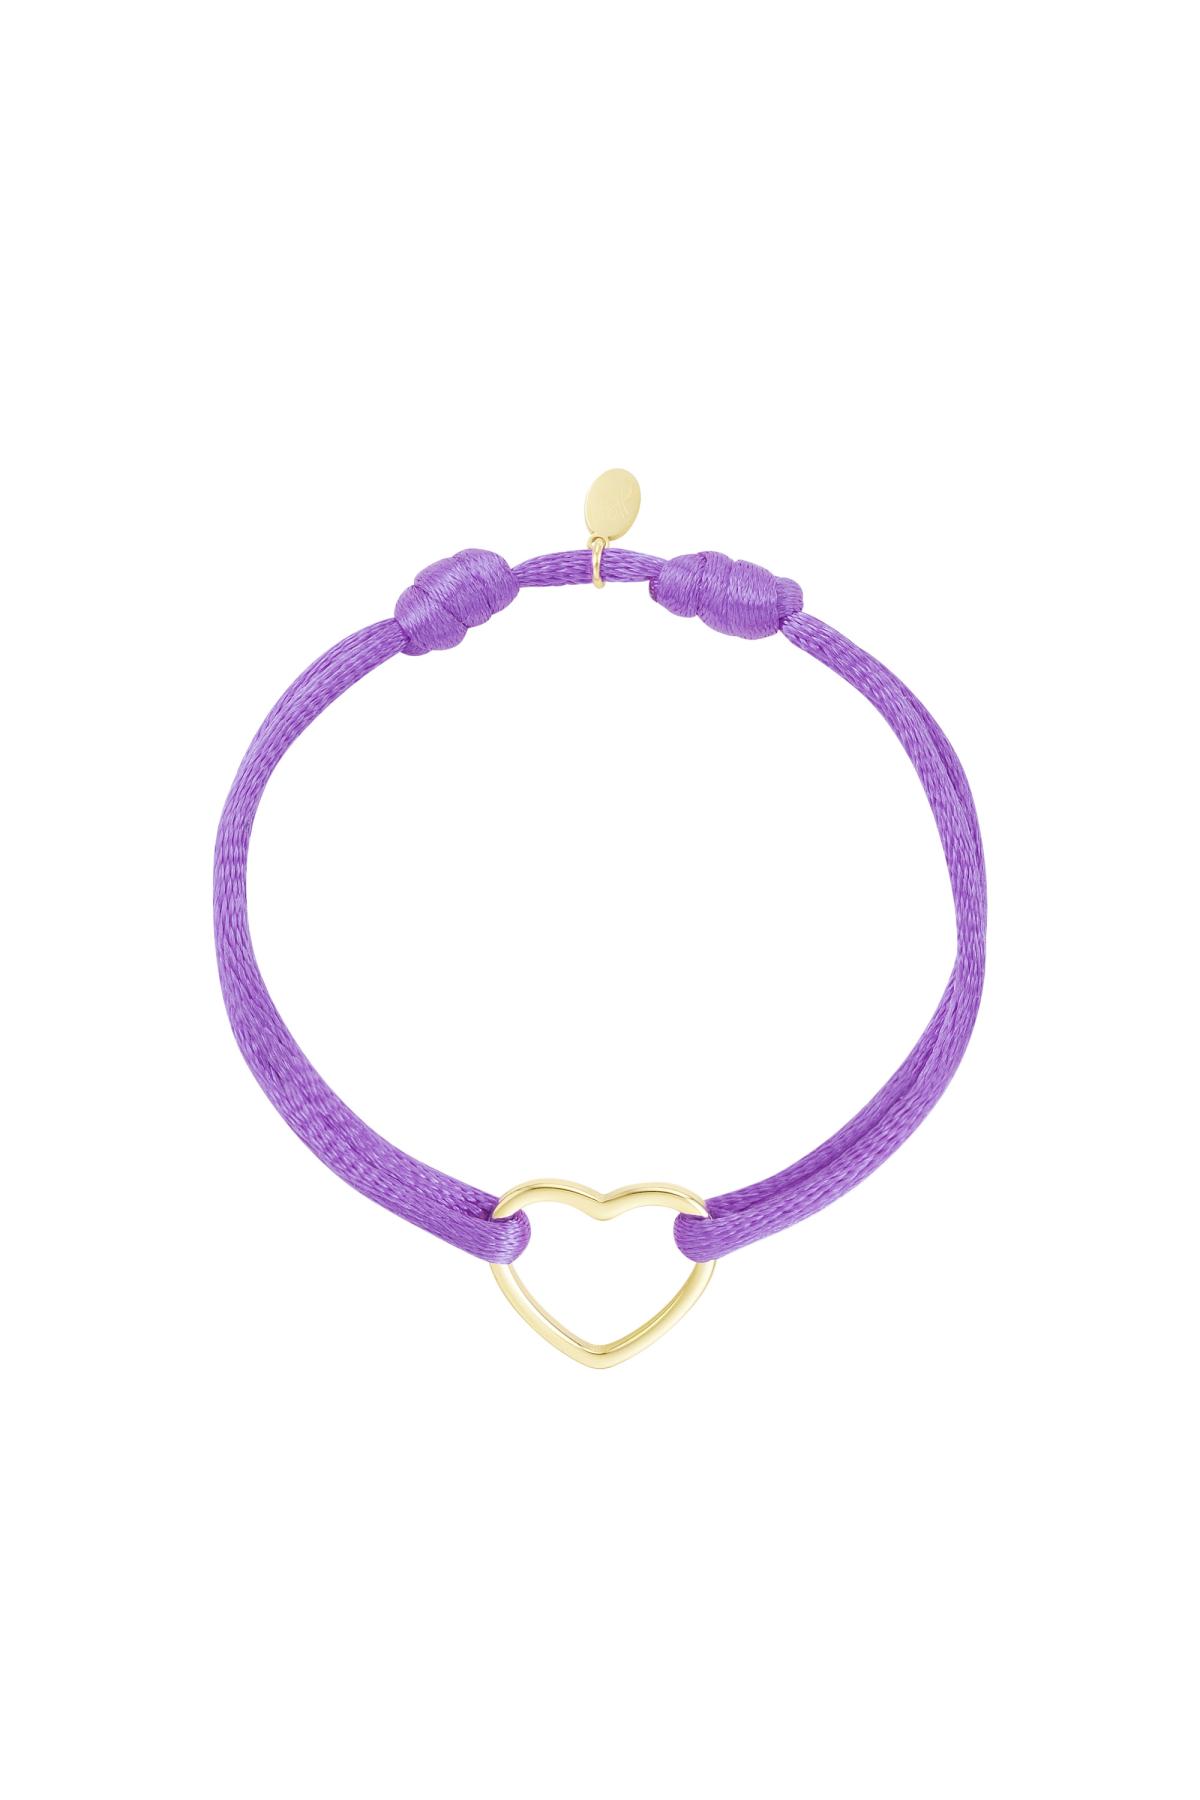 Bracciale in tessuto cuore Lilac Stainless Steel h5 